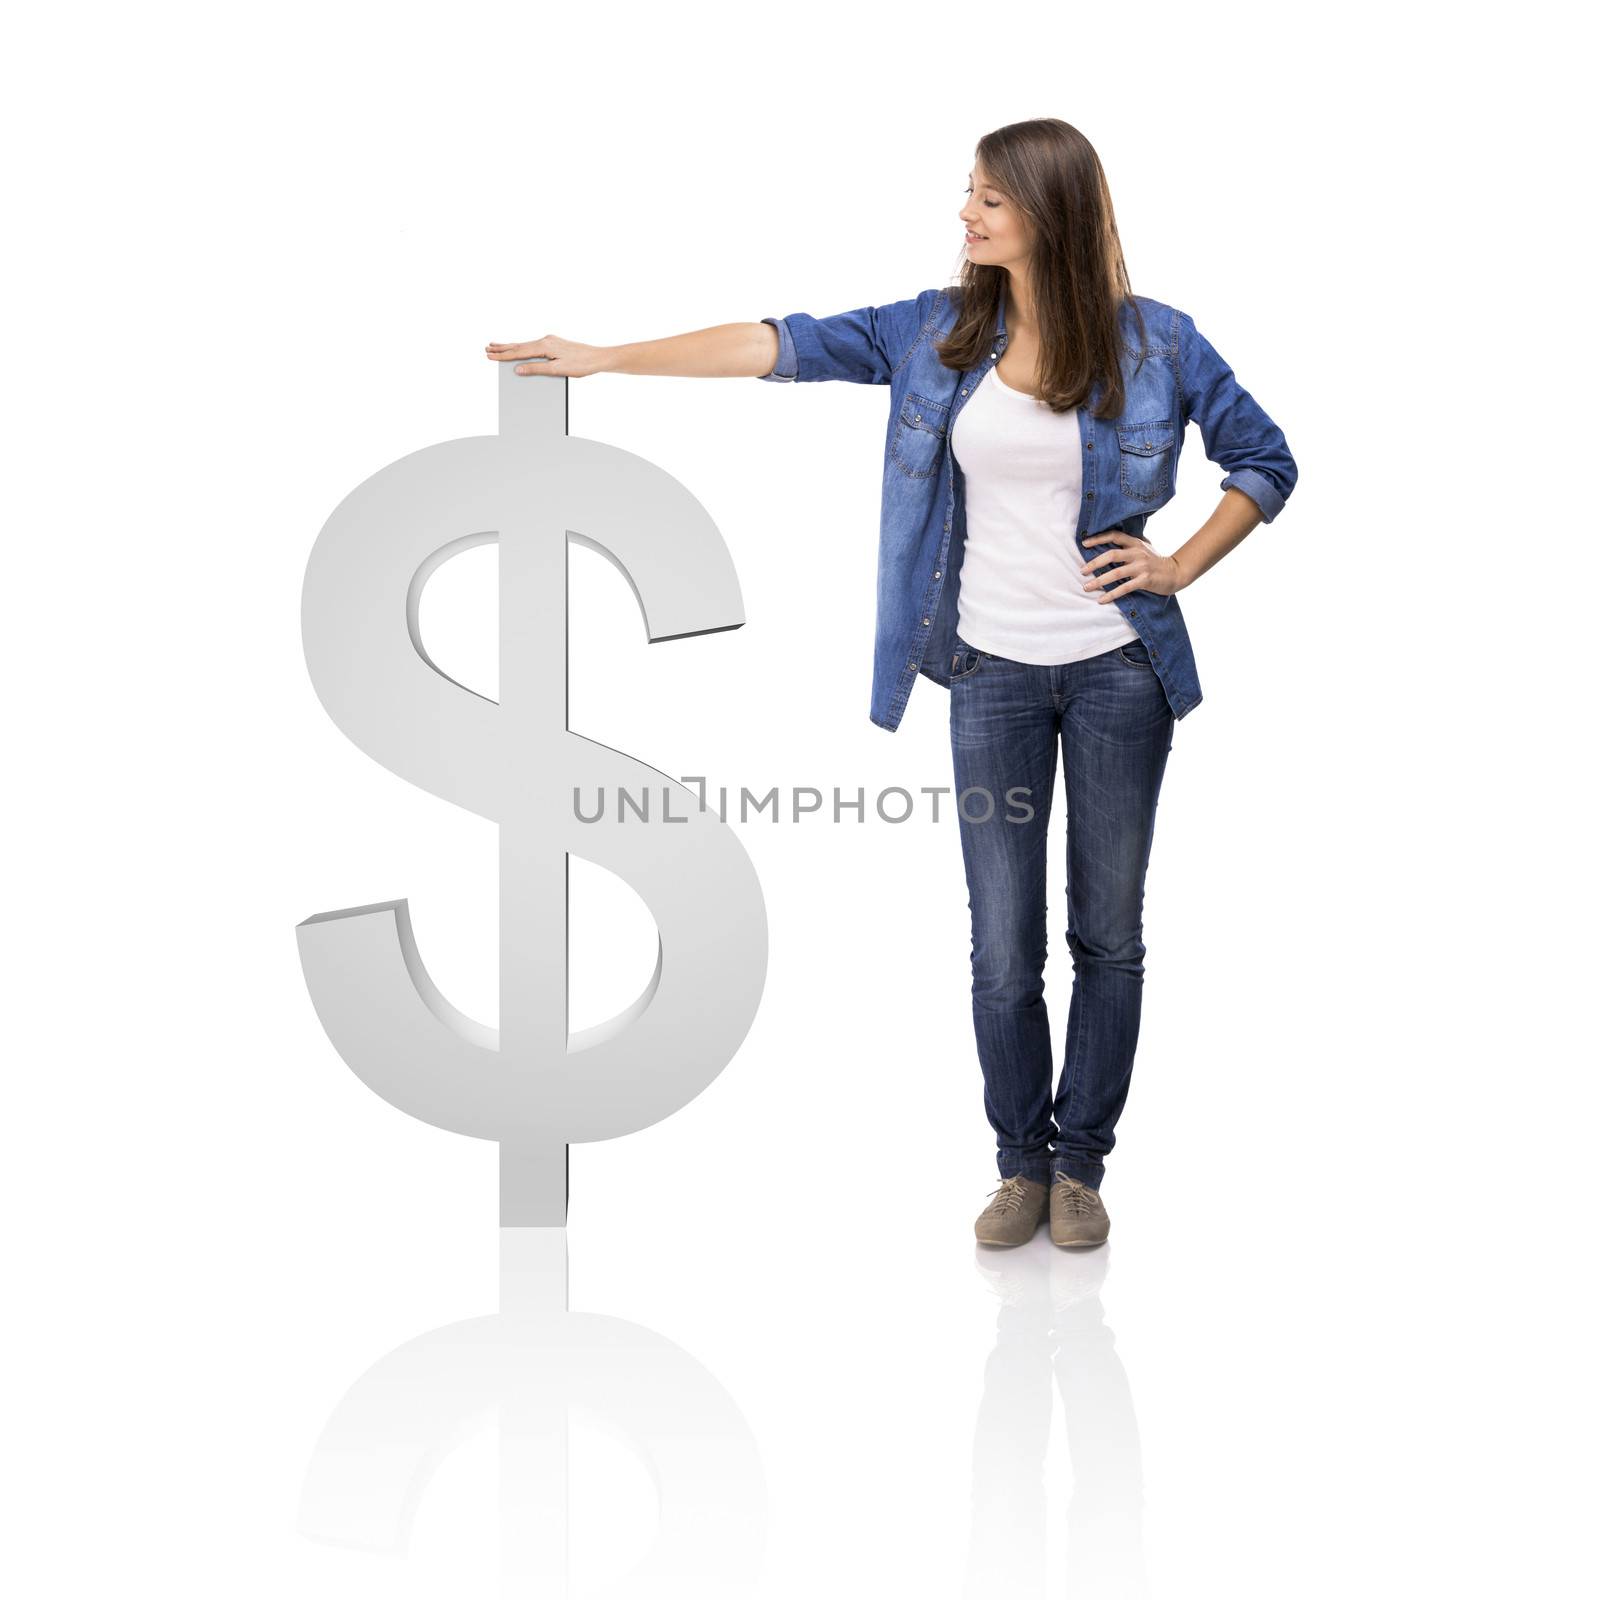 Beautiful woman standing over a Dollar symbol, isolated over a white background